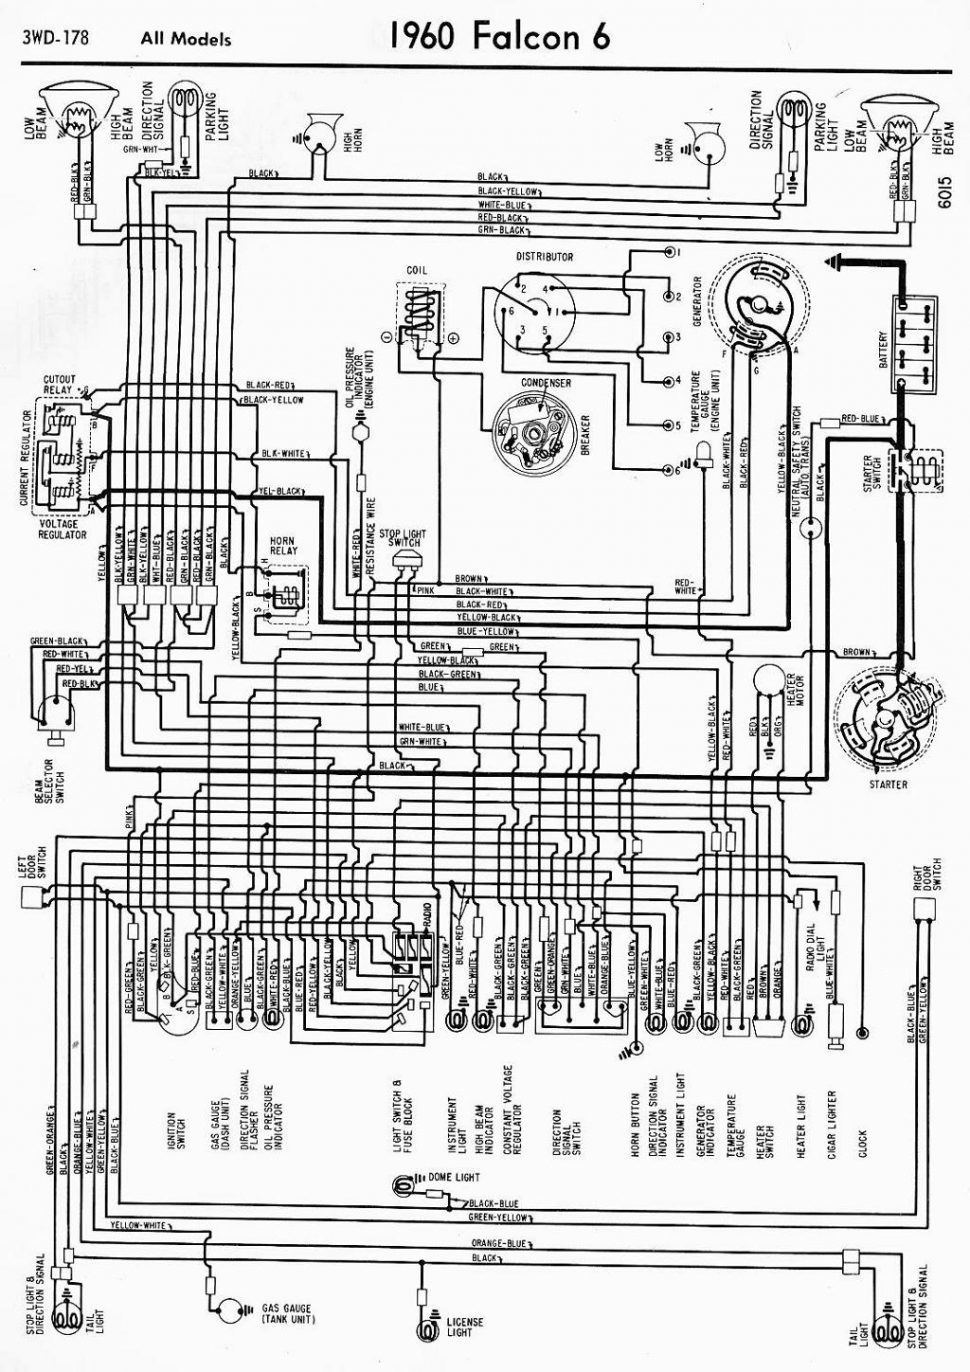 Freightliner Wiring Harness - Wiring Diagrams Hubs - Freightliner Headlight Wiring Diagram